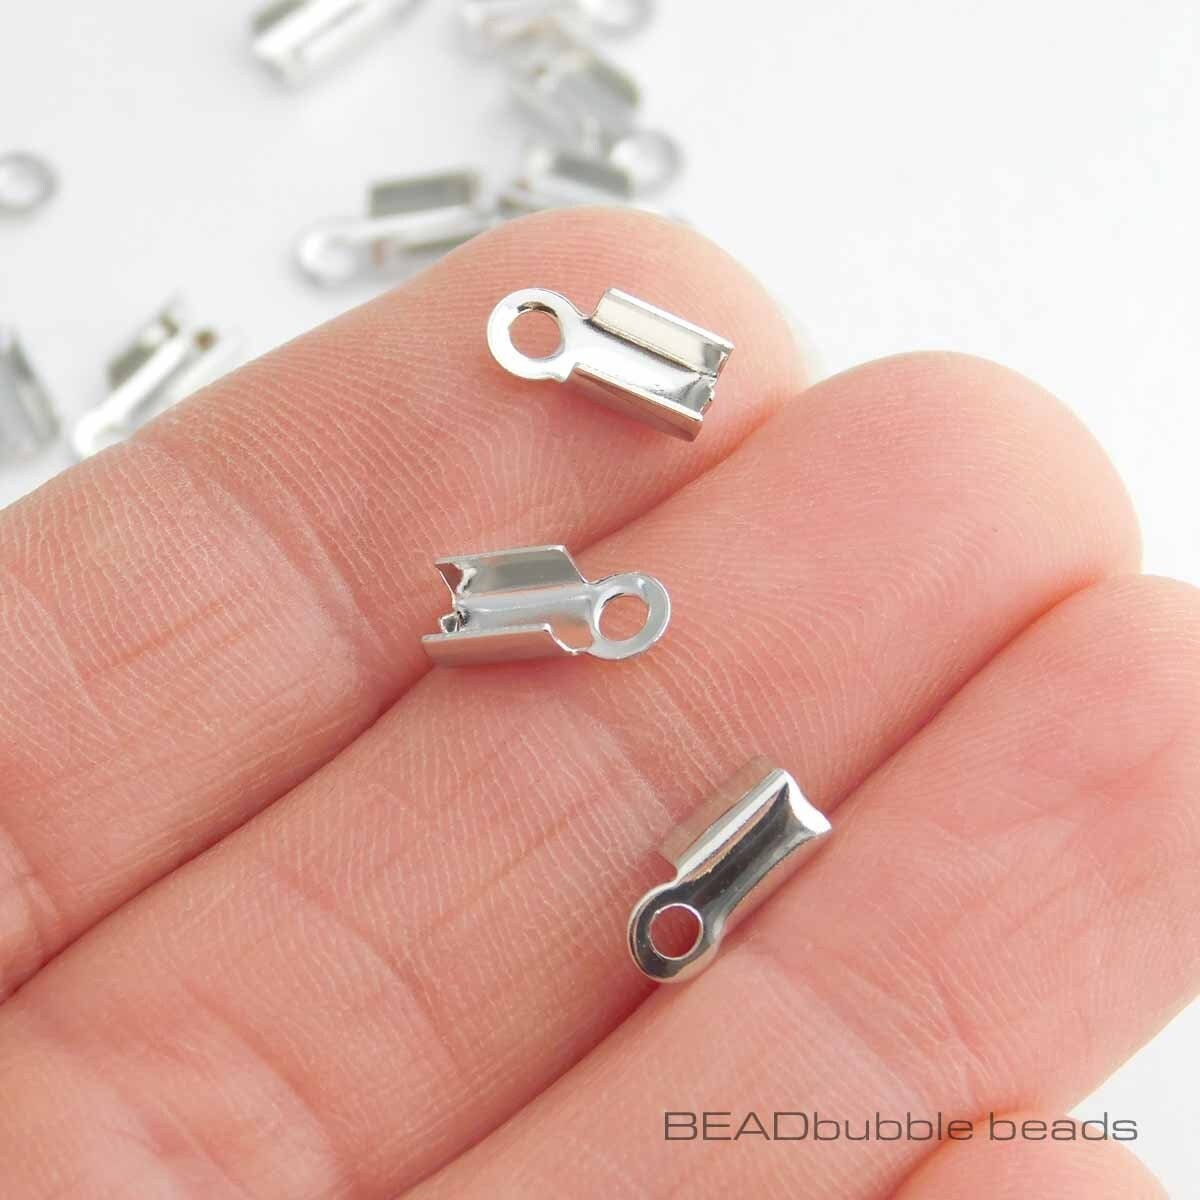 30 Pcs Stainless Steel Silver Fold Over Crimp Cord End Findings